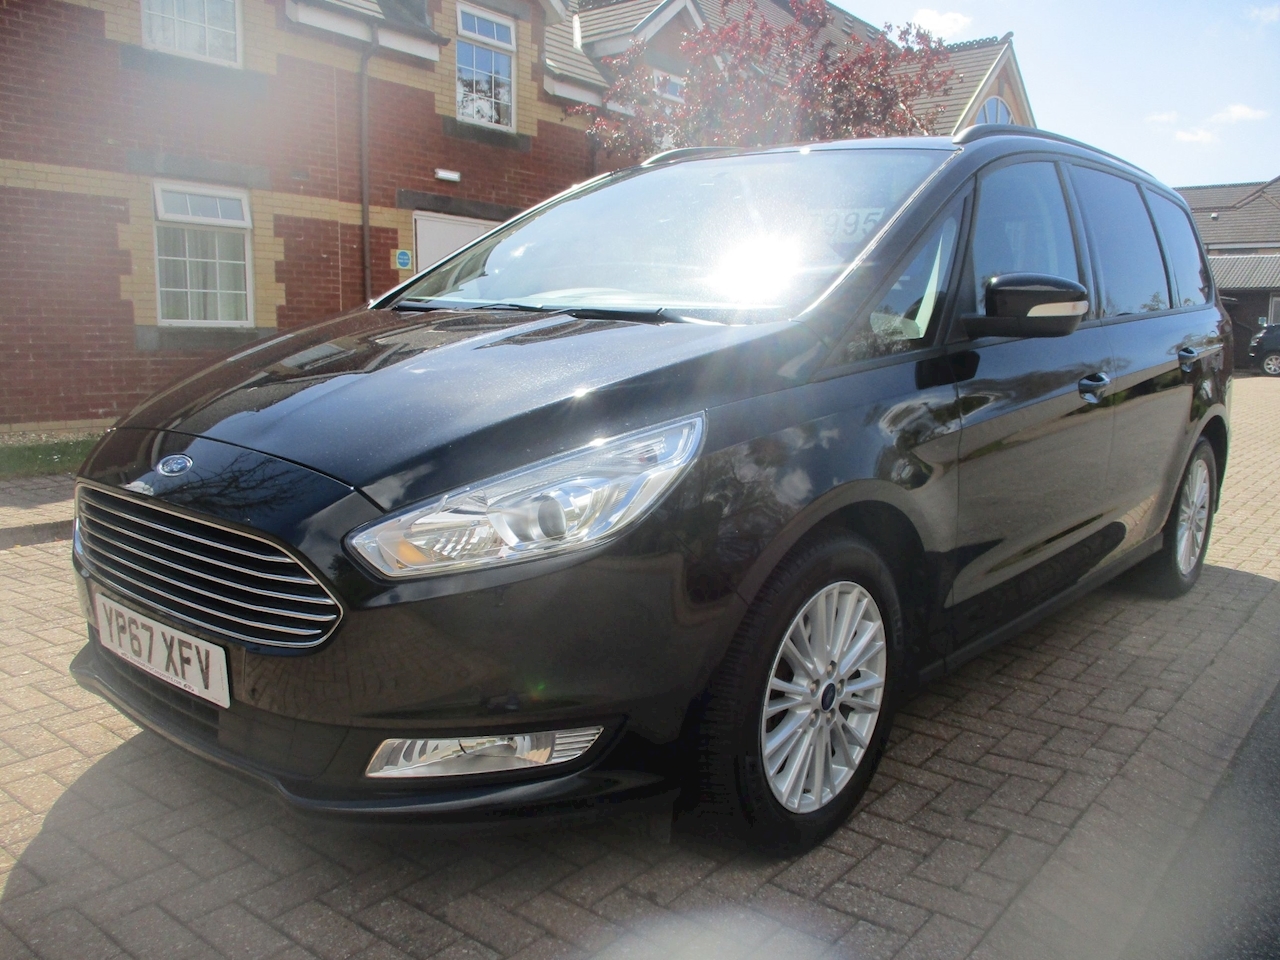 Ford Galaxy: Large 7-Seater MPV